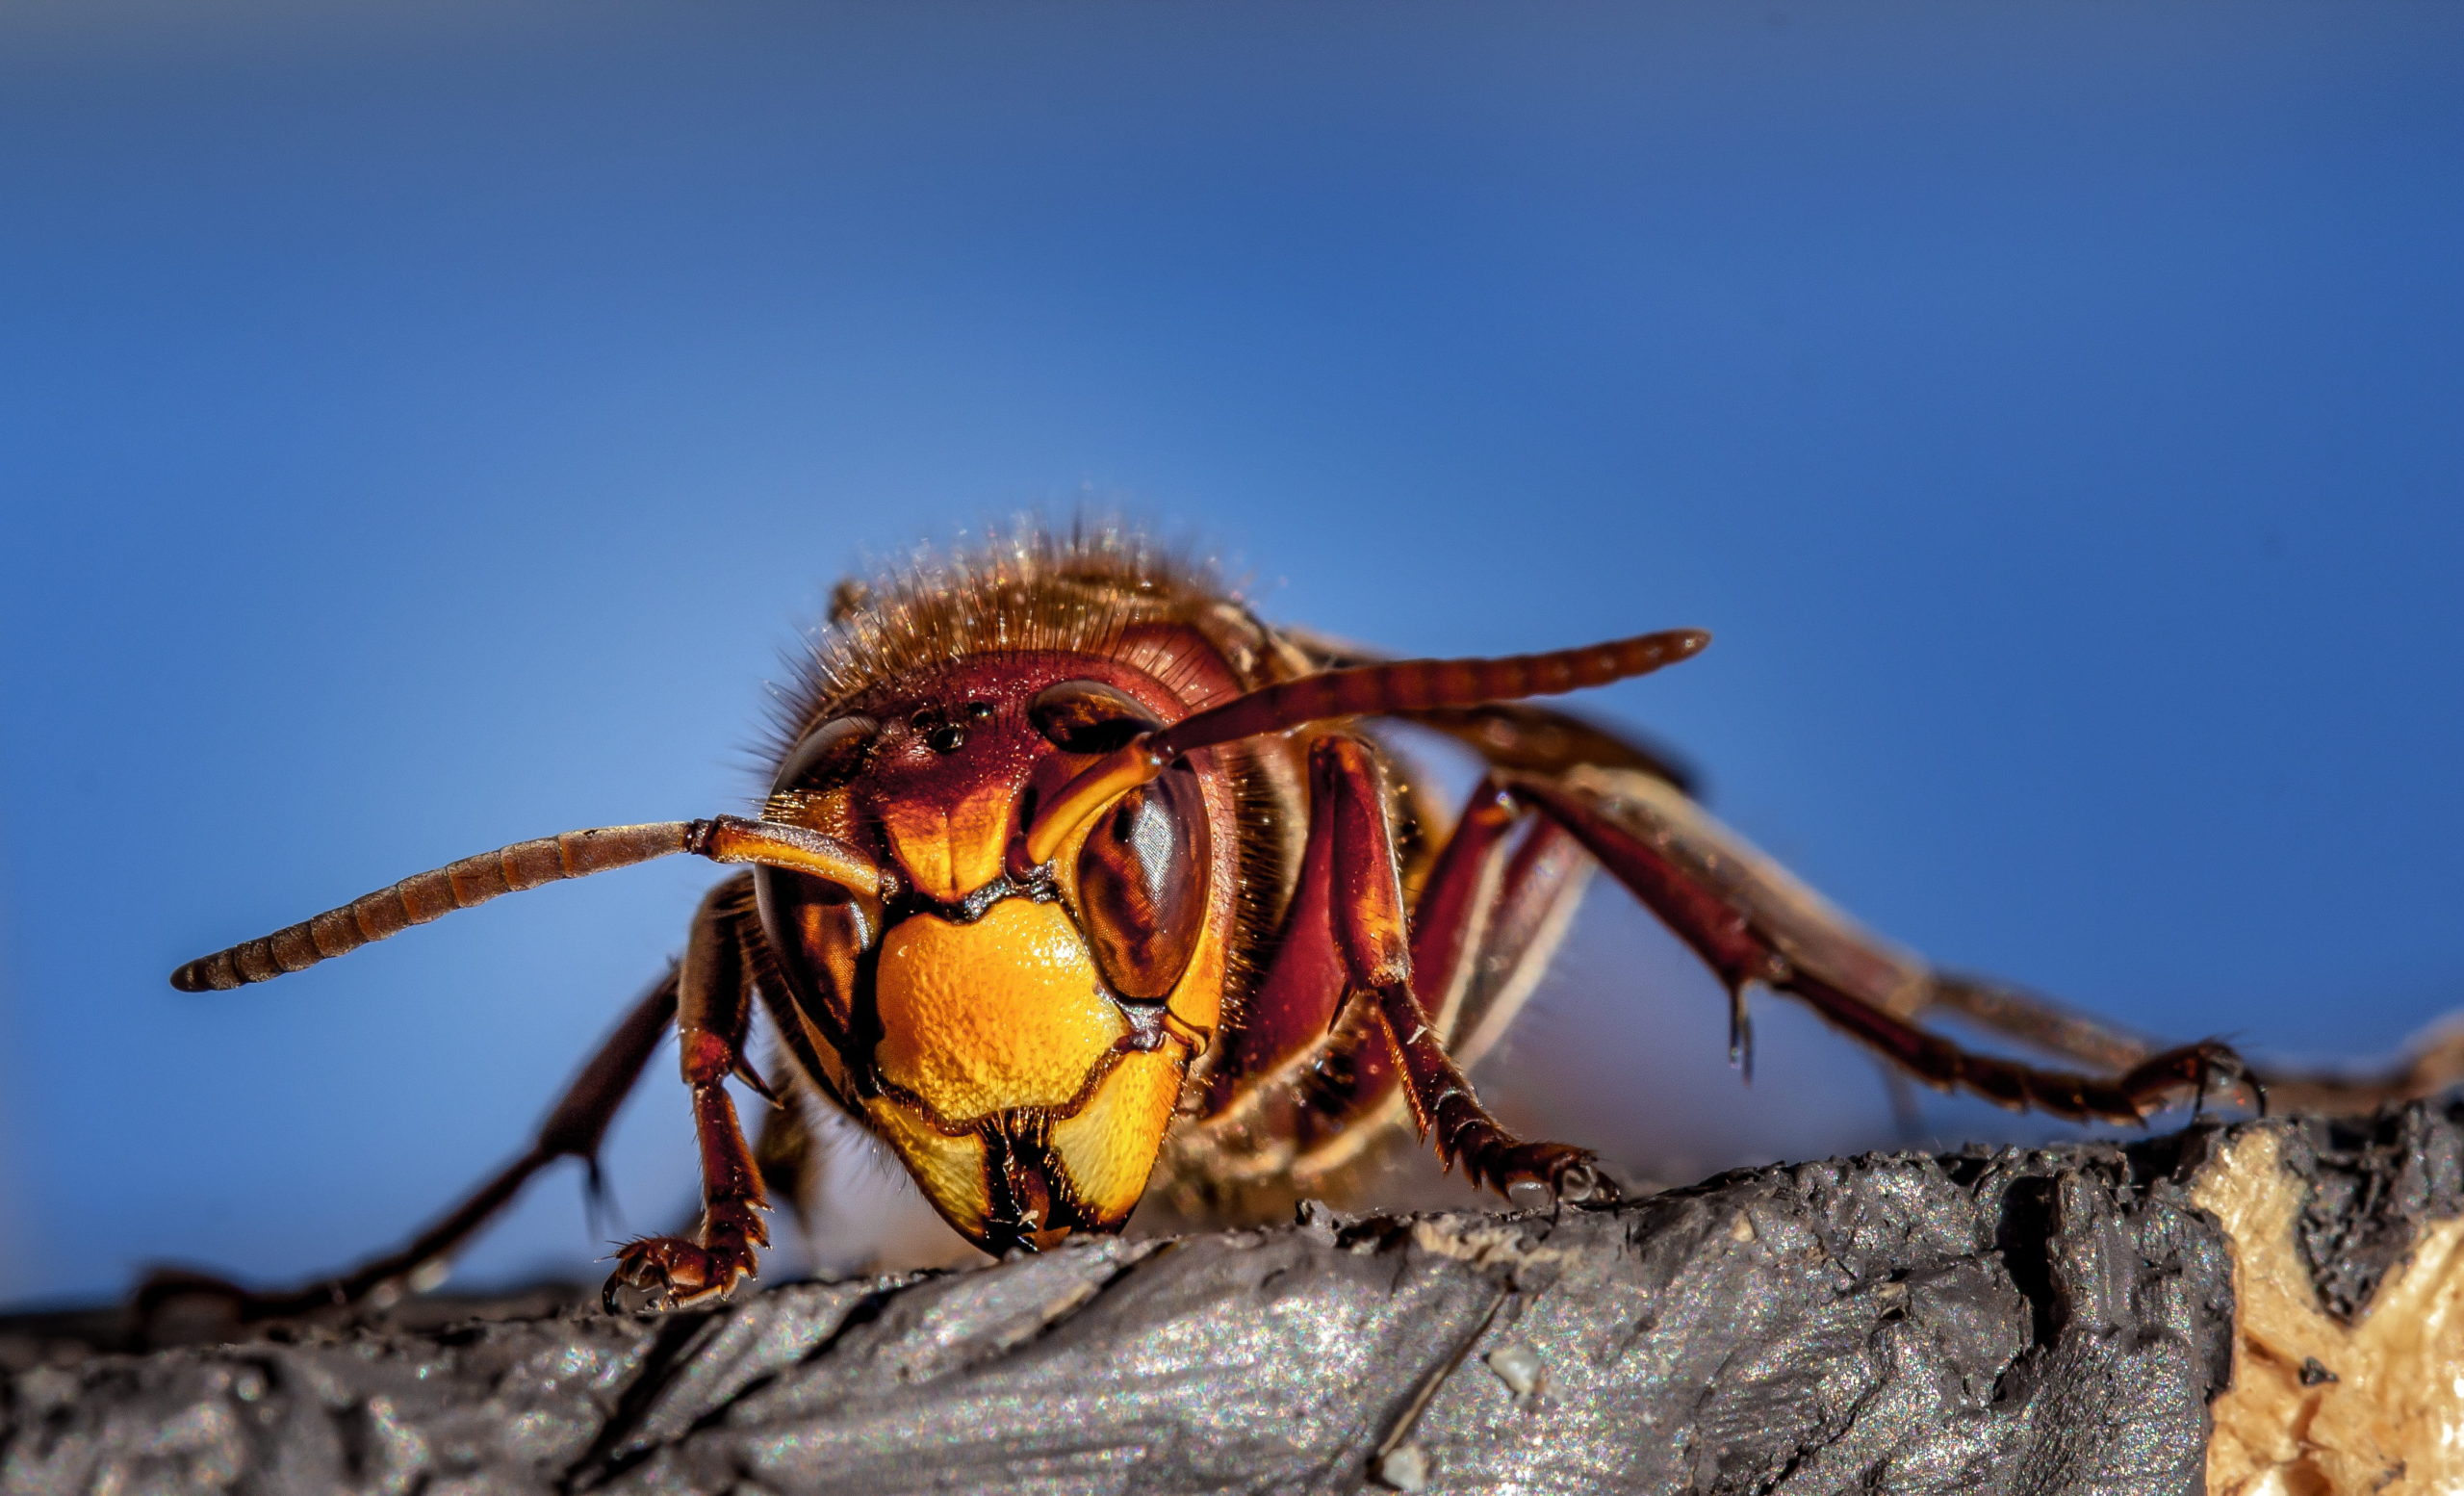 How Harmful Are Murder Hornets to Humans?